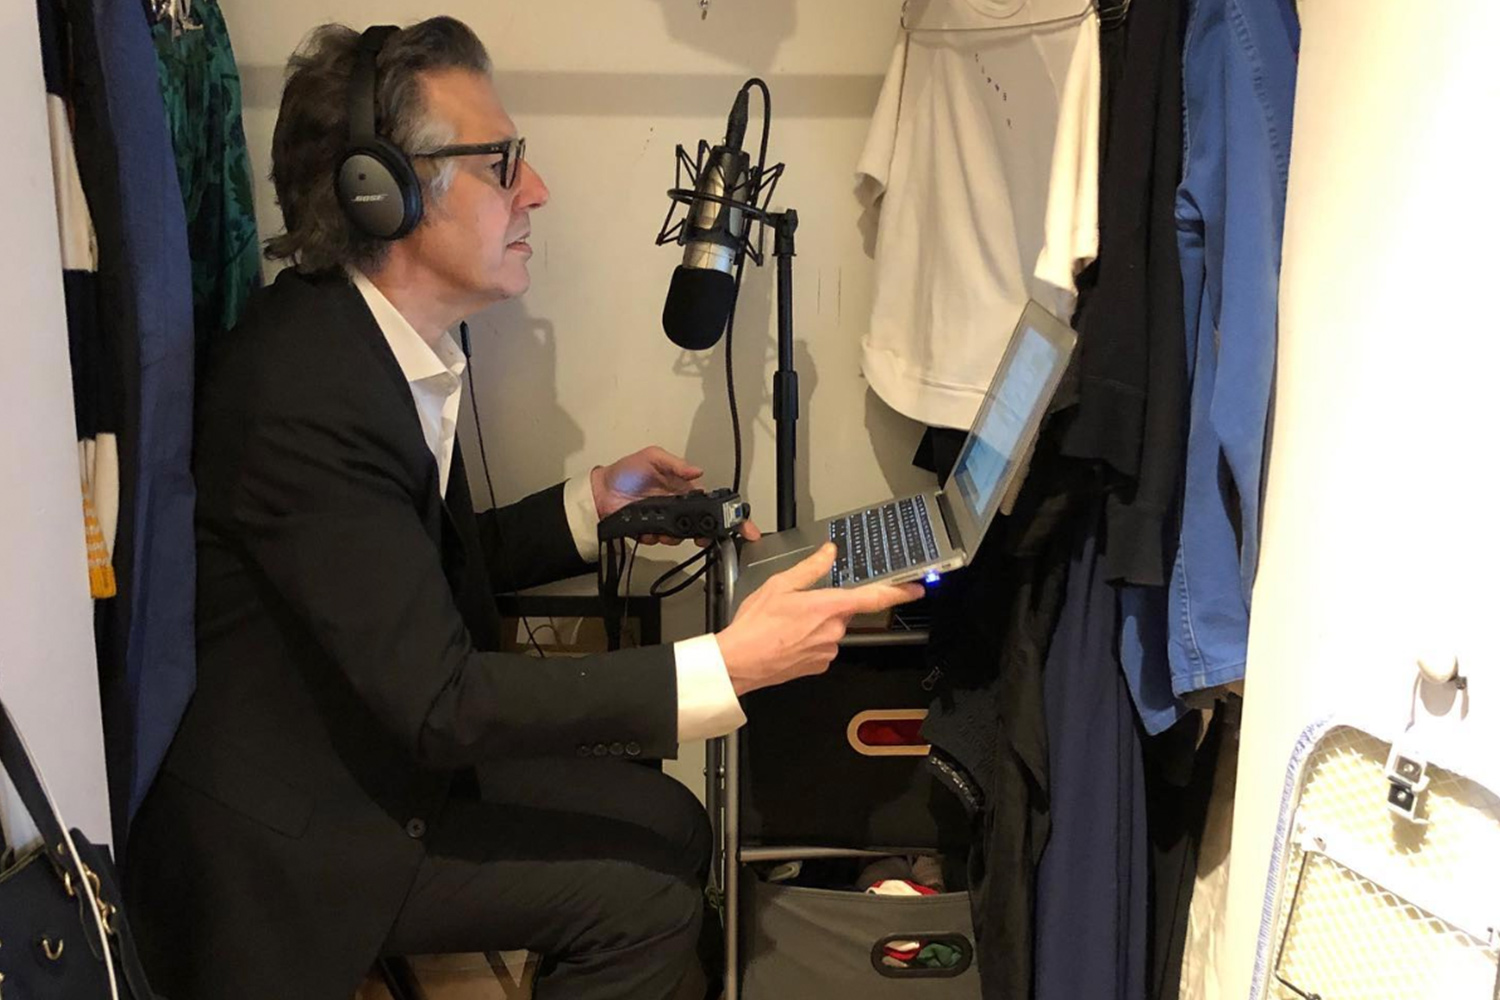 Ira Glass reading his show This American Life in his closet dressed in a suit